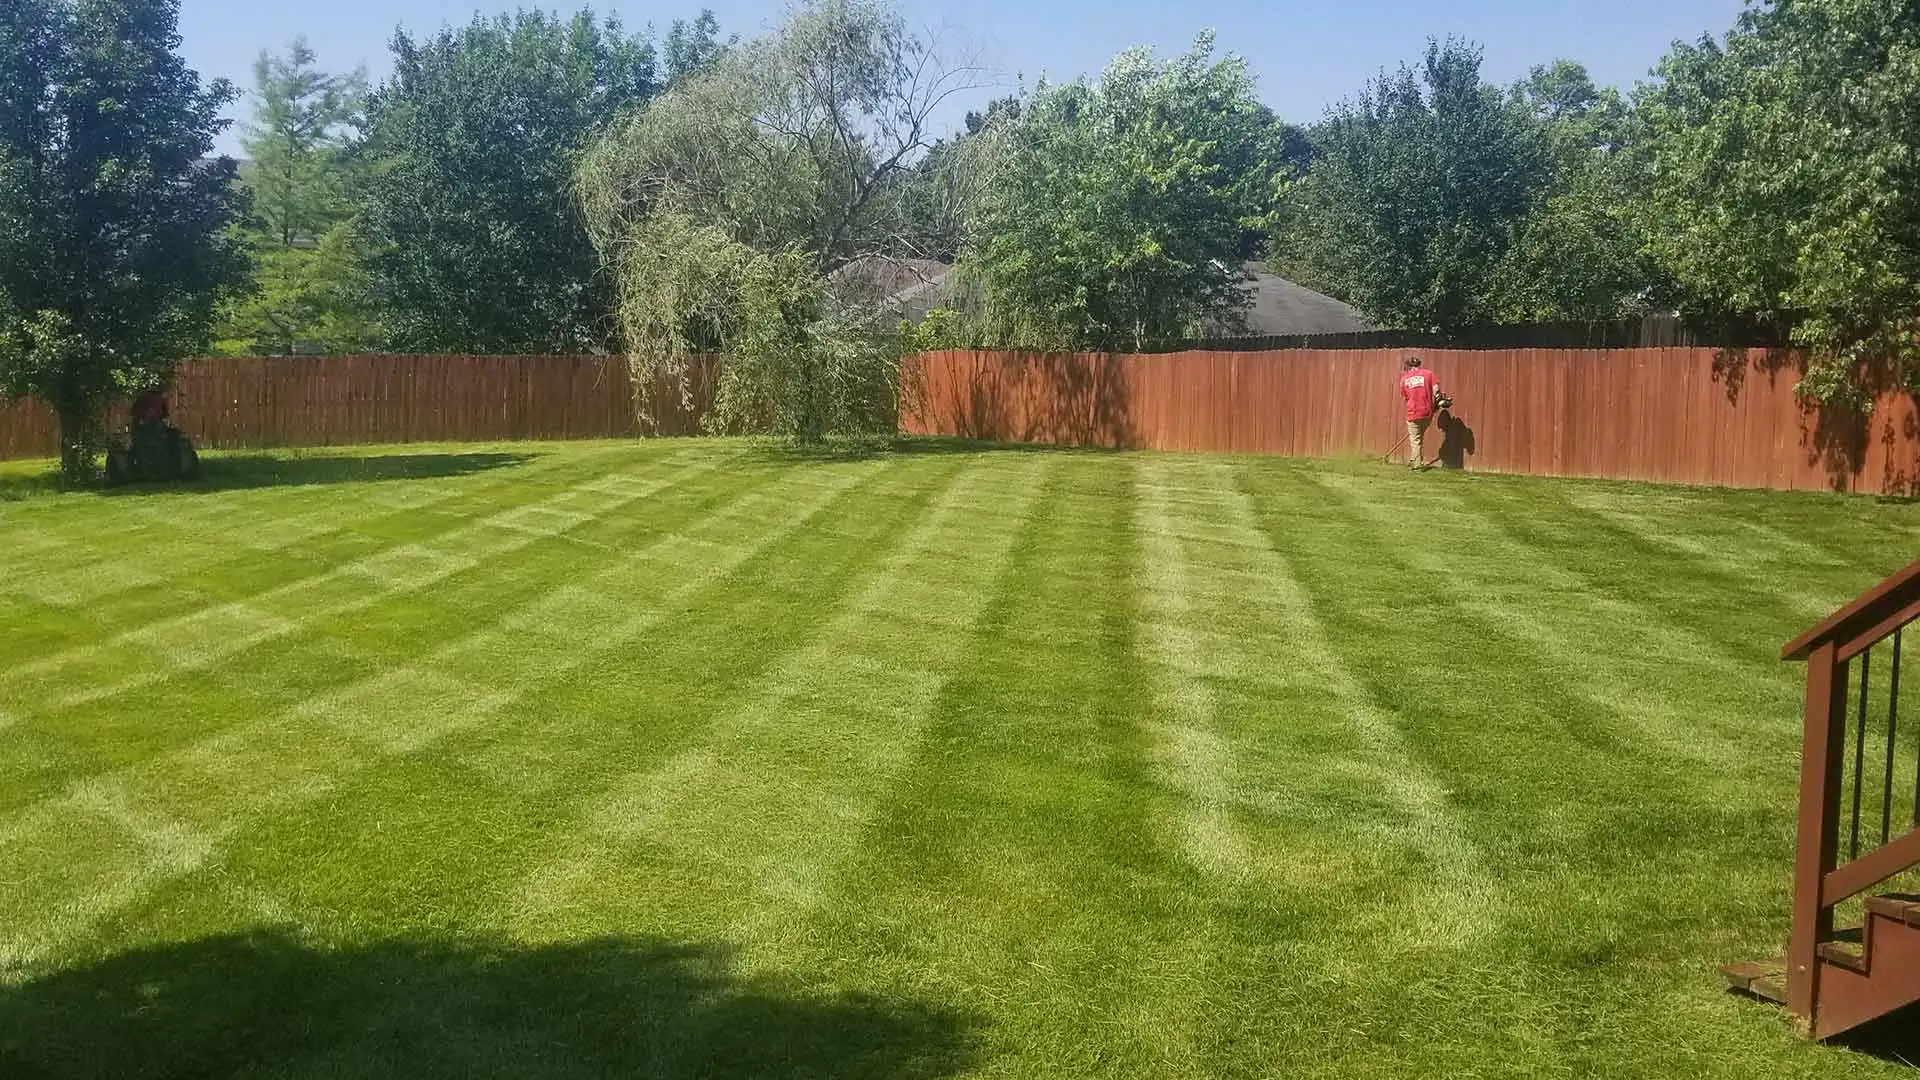 Well maintained and fertilized home lawn in Columbia, Missouri.